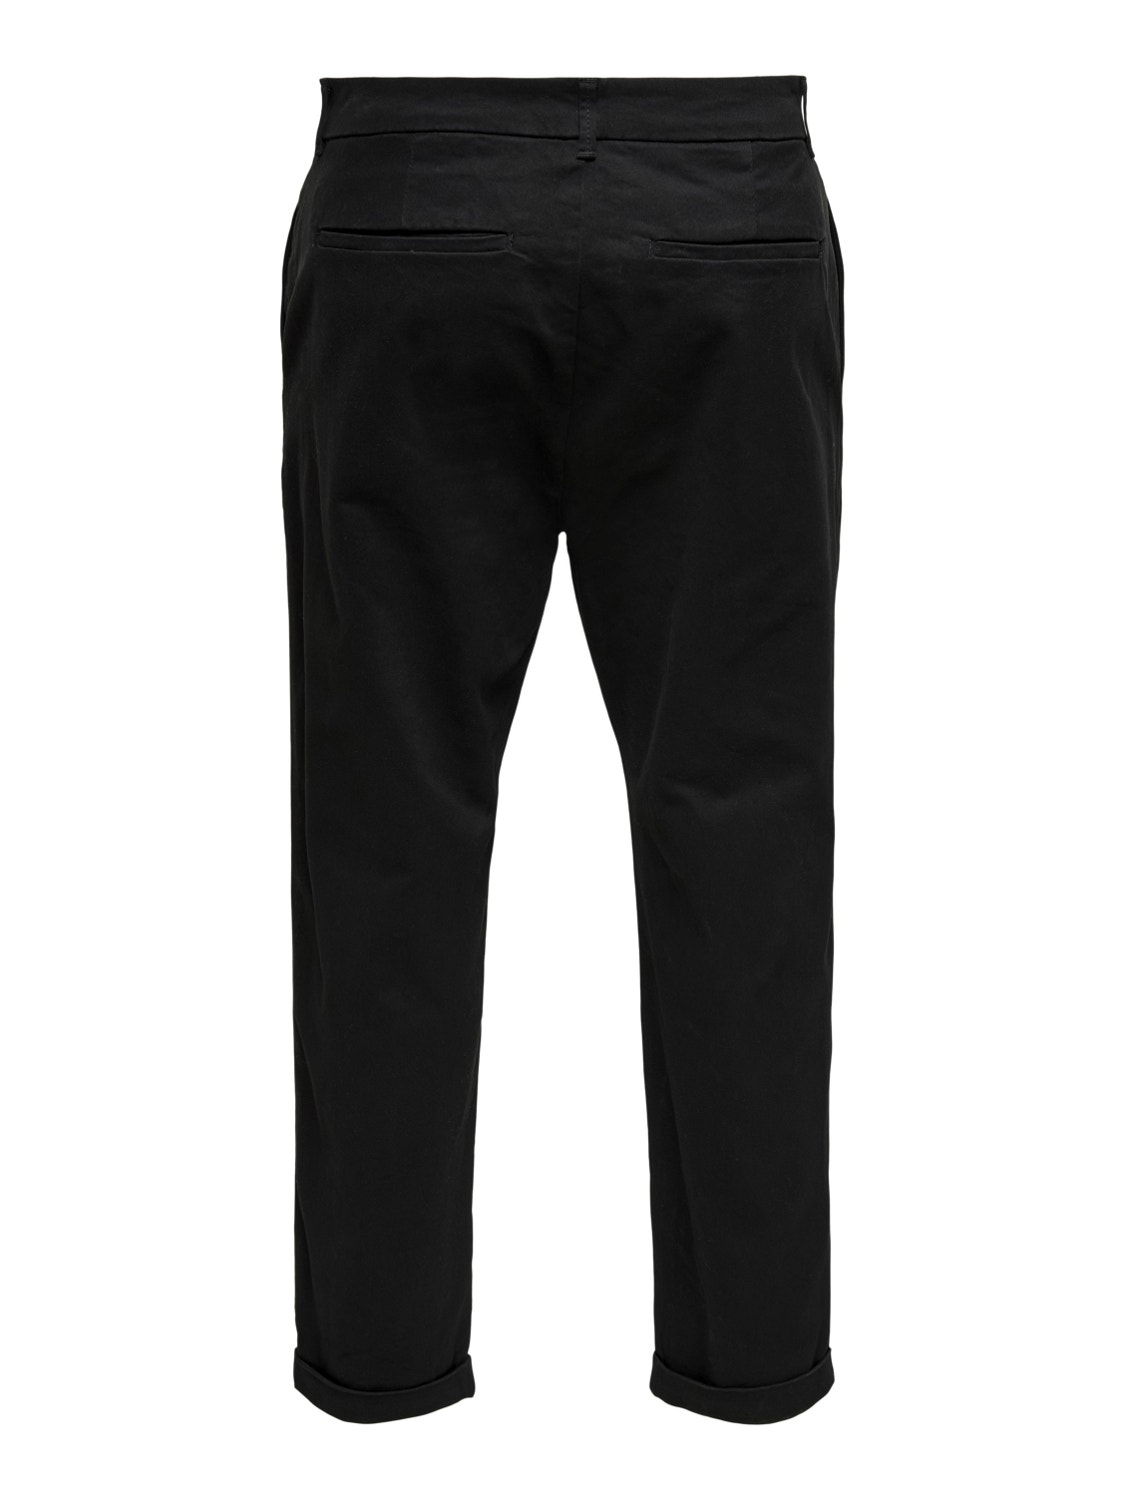 ONLY & SONS Regular Fit Chinos -Black - 22020400